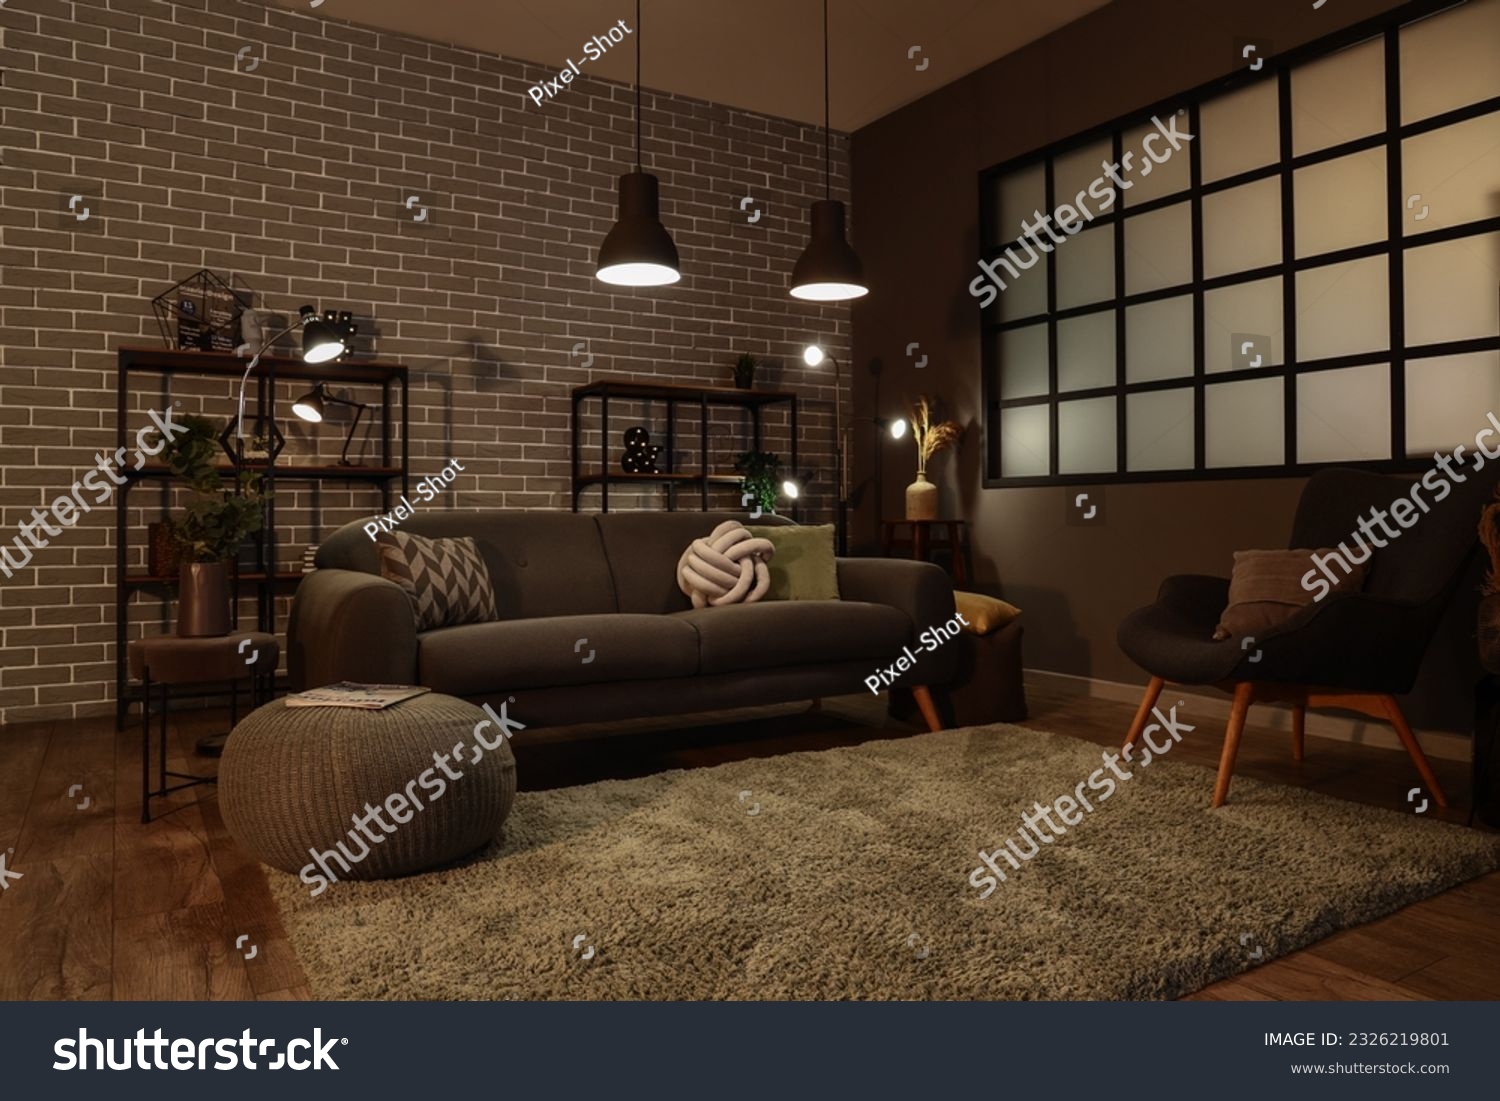 Interior of dark living room with cozy grey sofa and glowing lamps #2326219801